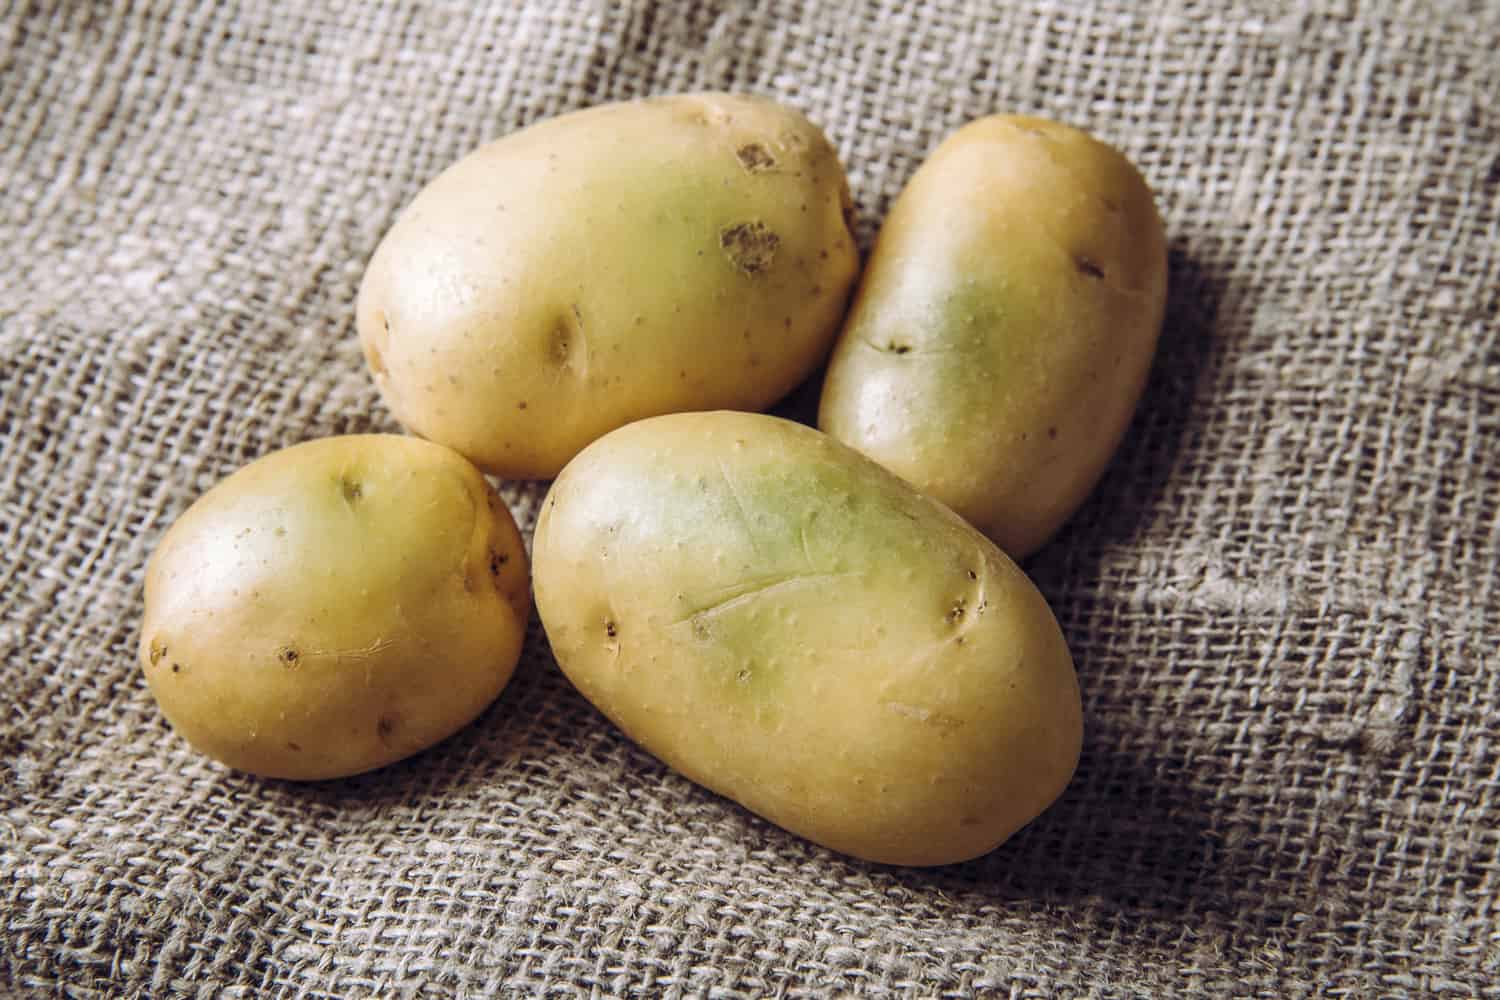 unlight and warmth turn potatoes skin green witch contain high levels of a toxin, solanine which can cause sickness and is poisonous.